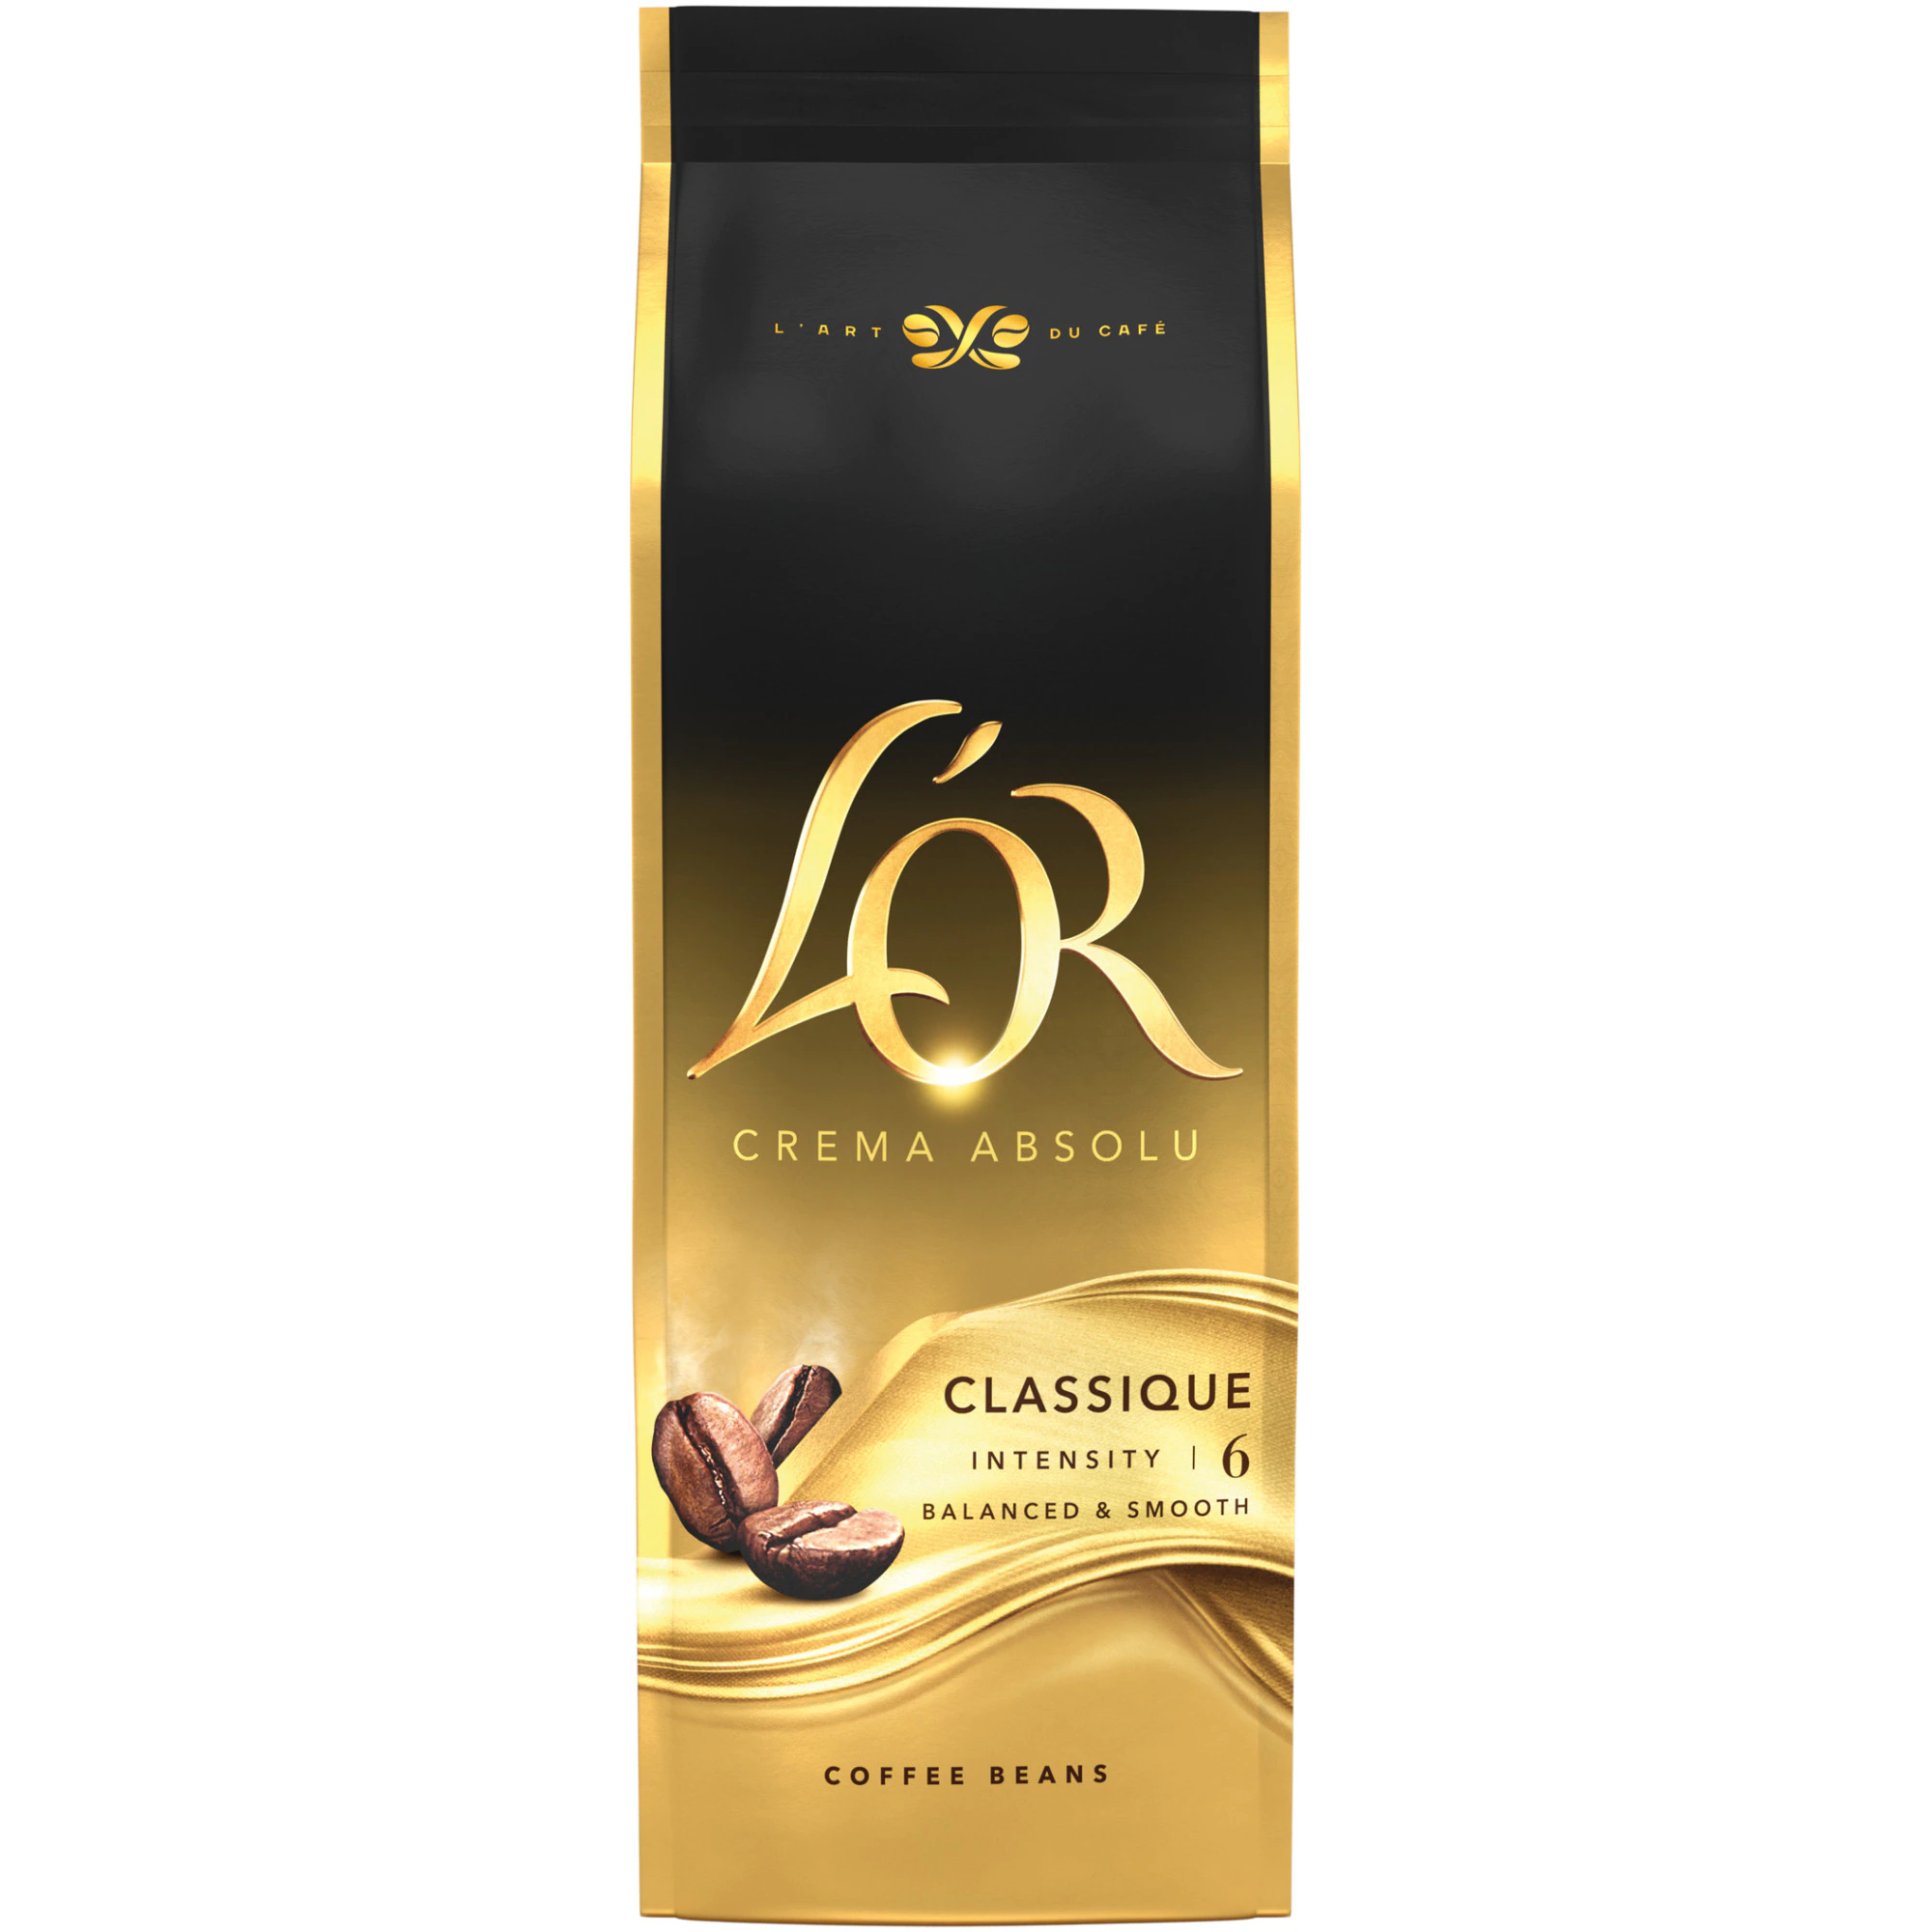 L'OR Crema Absolu Clasique Cafea Boabe 500g [2]